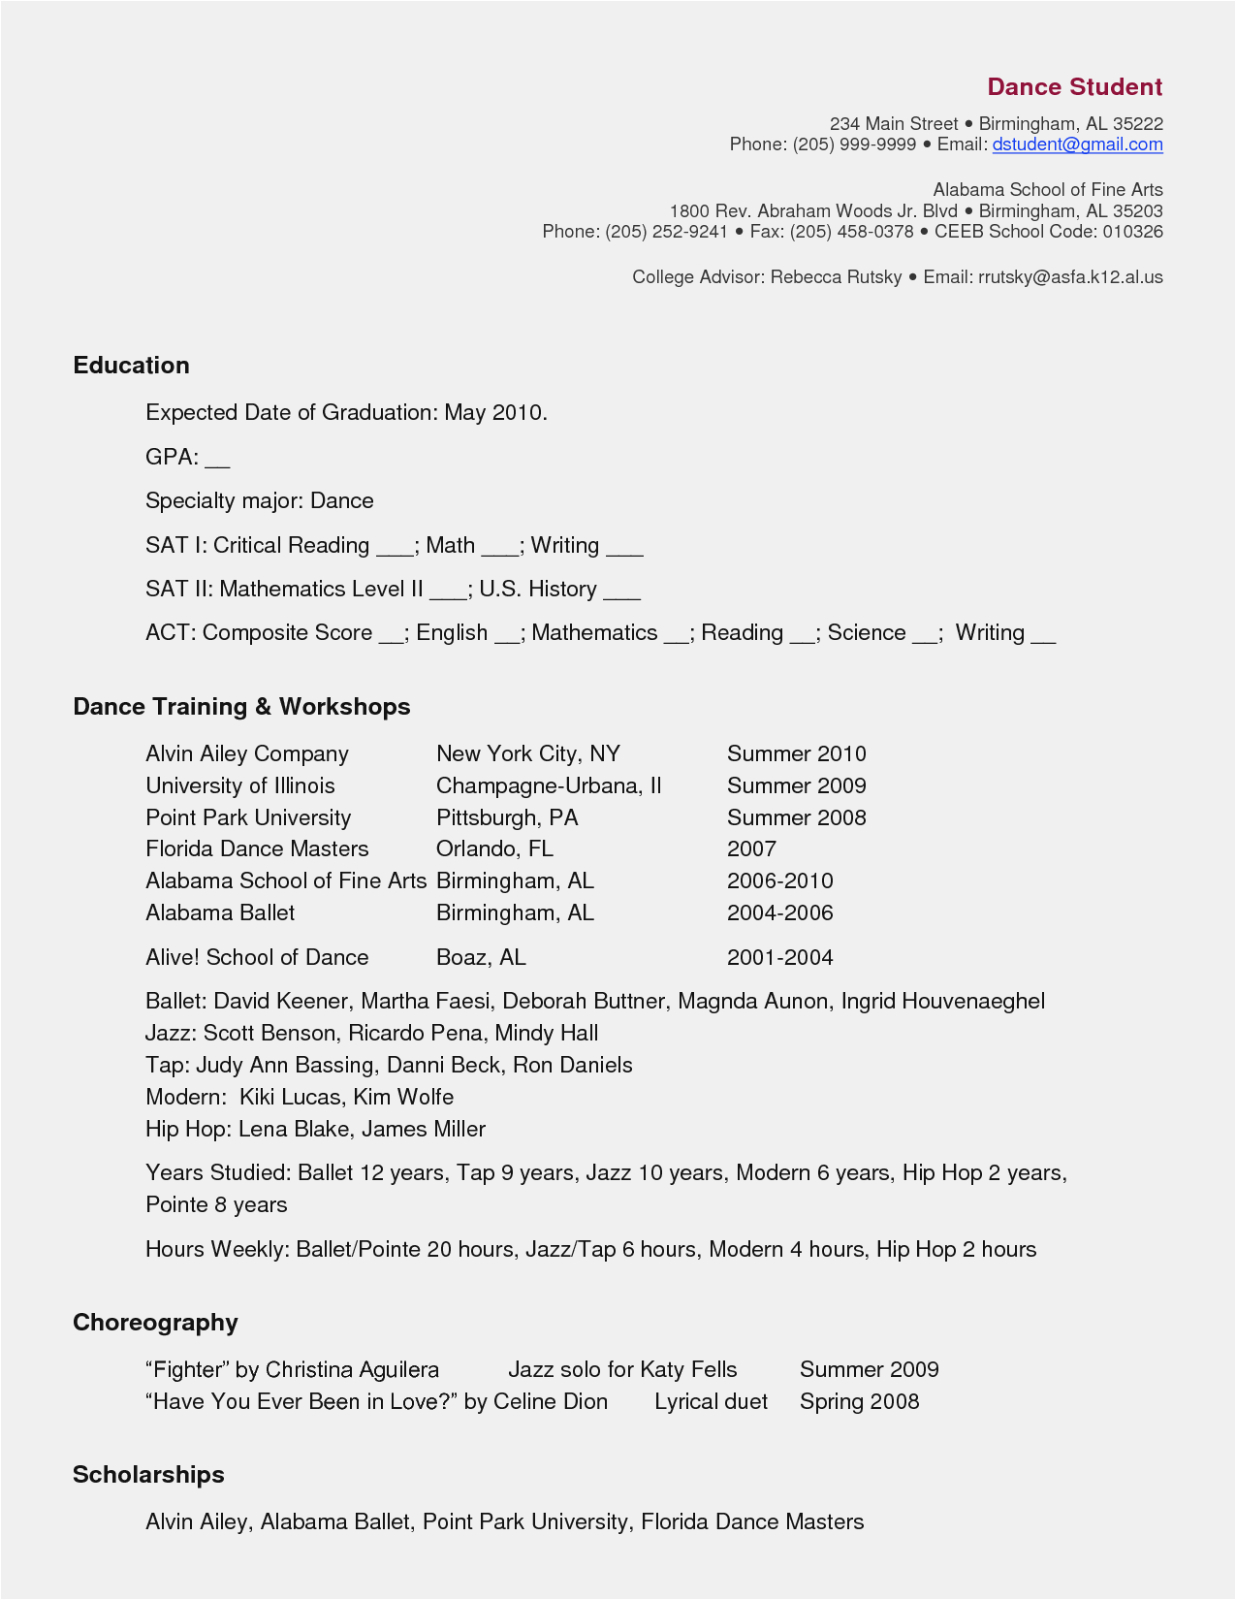 Sample Dance Resume for College Audition Ten Things to Avoid In